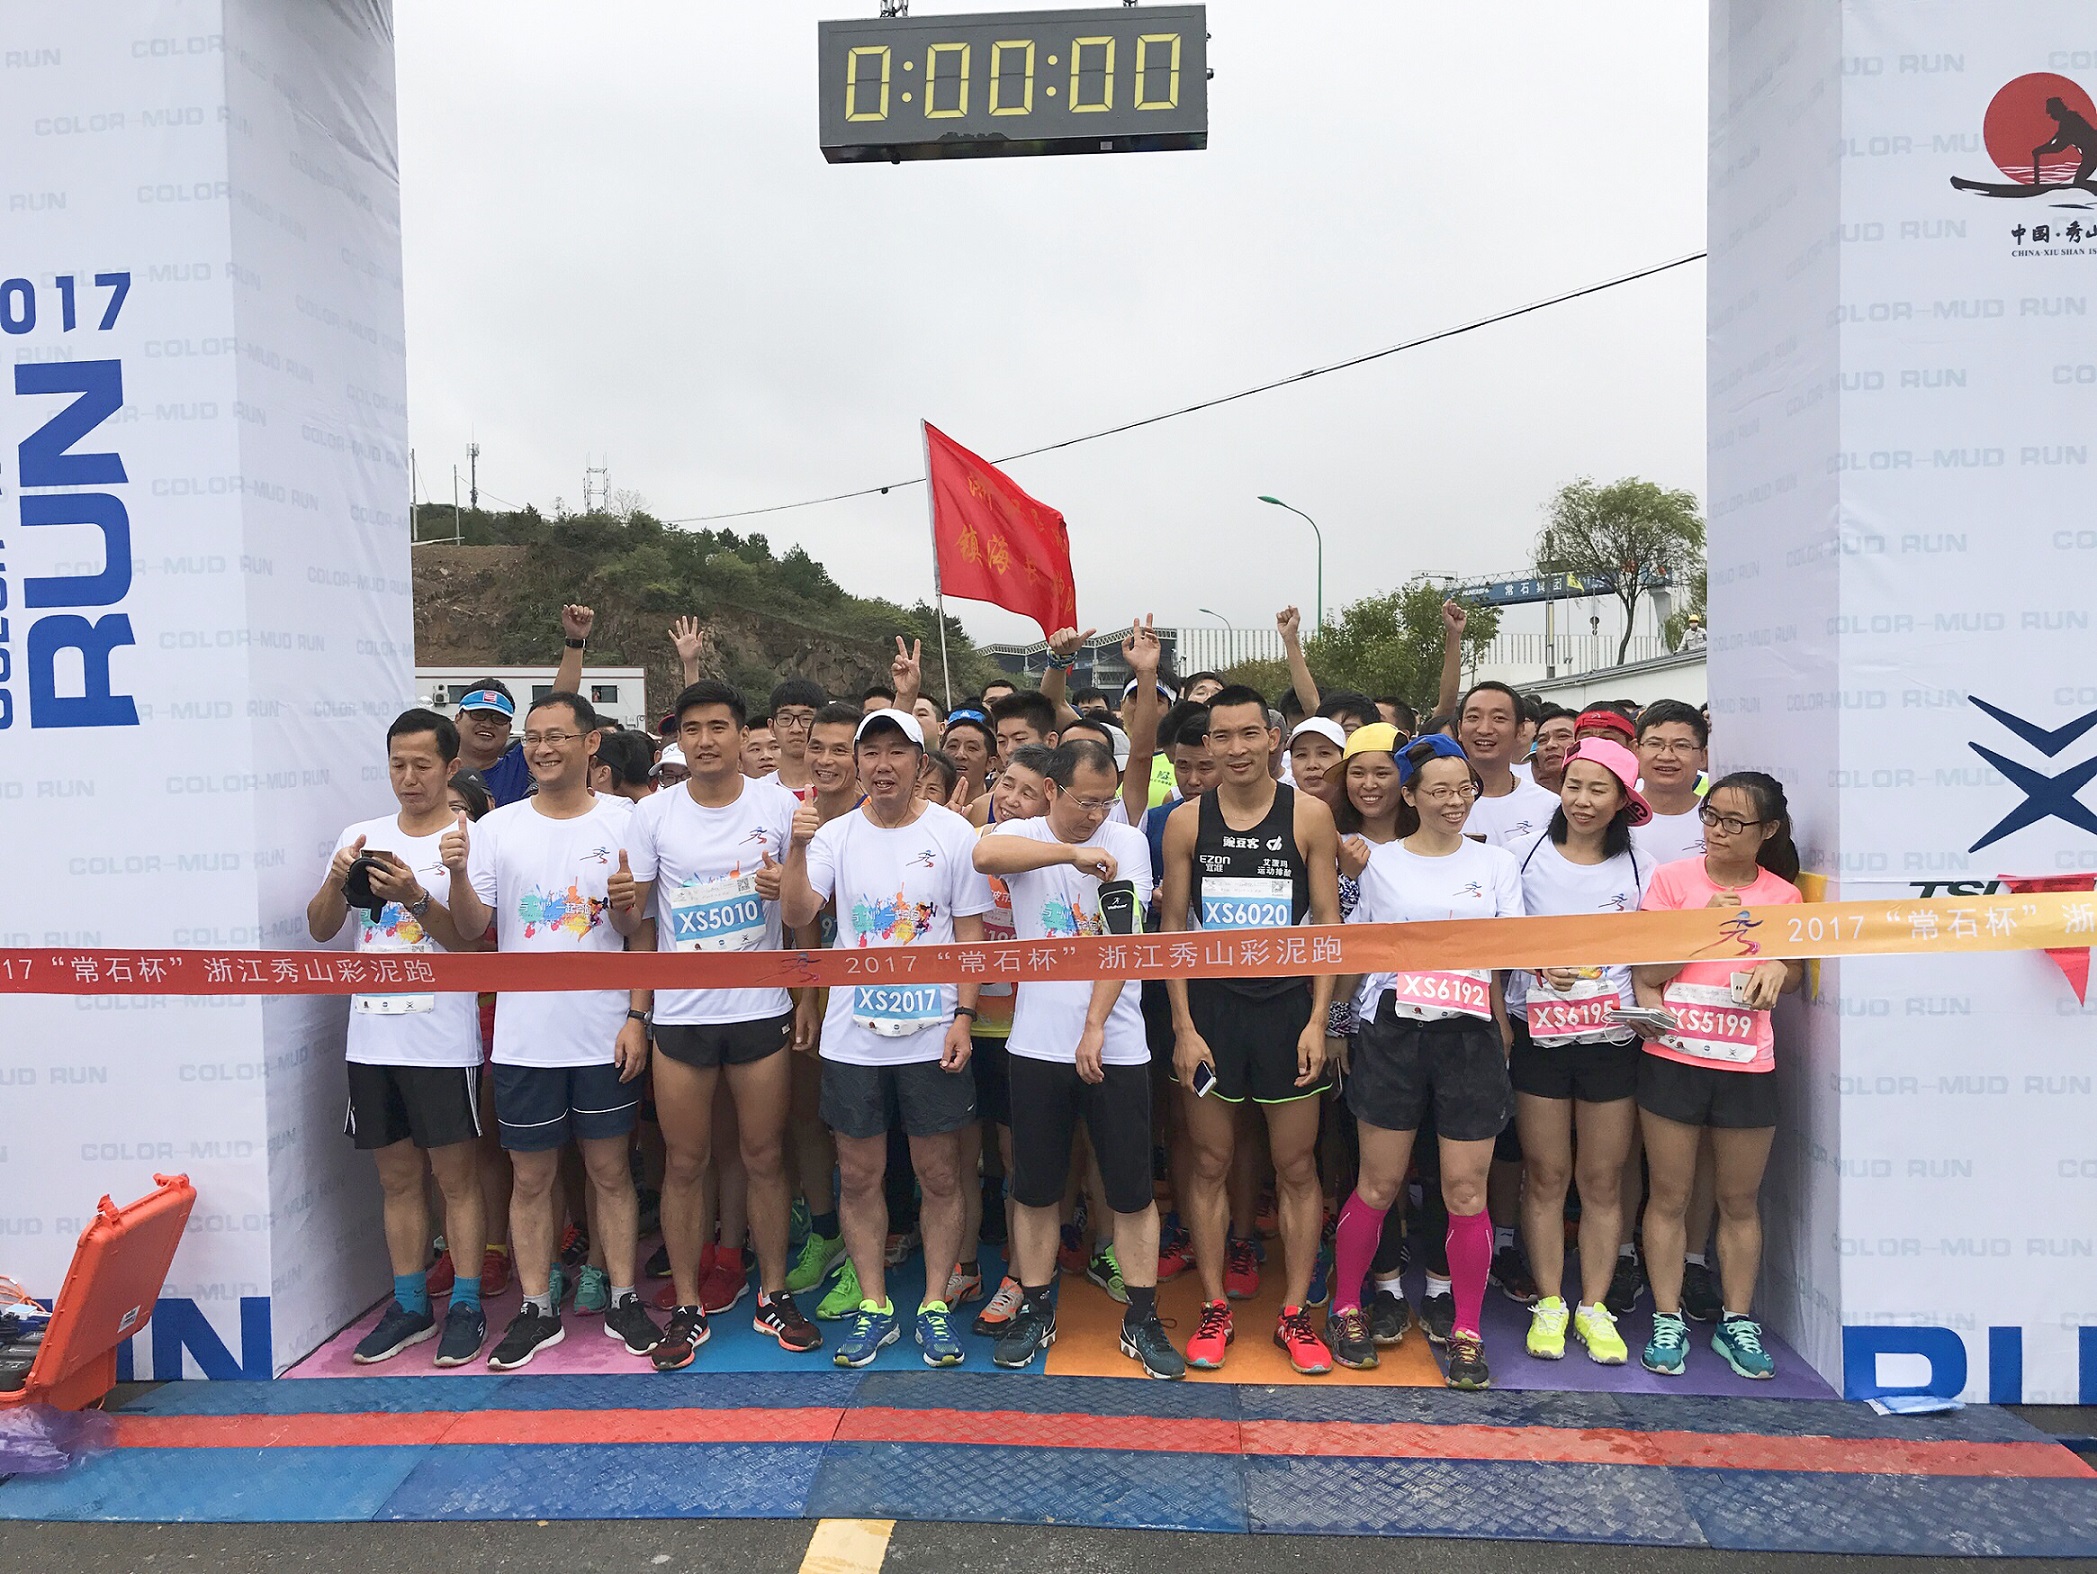 More Than 1,000 People Compete “2017 TSUNEISHI CUP” Marathon Held at Xiushan Island